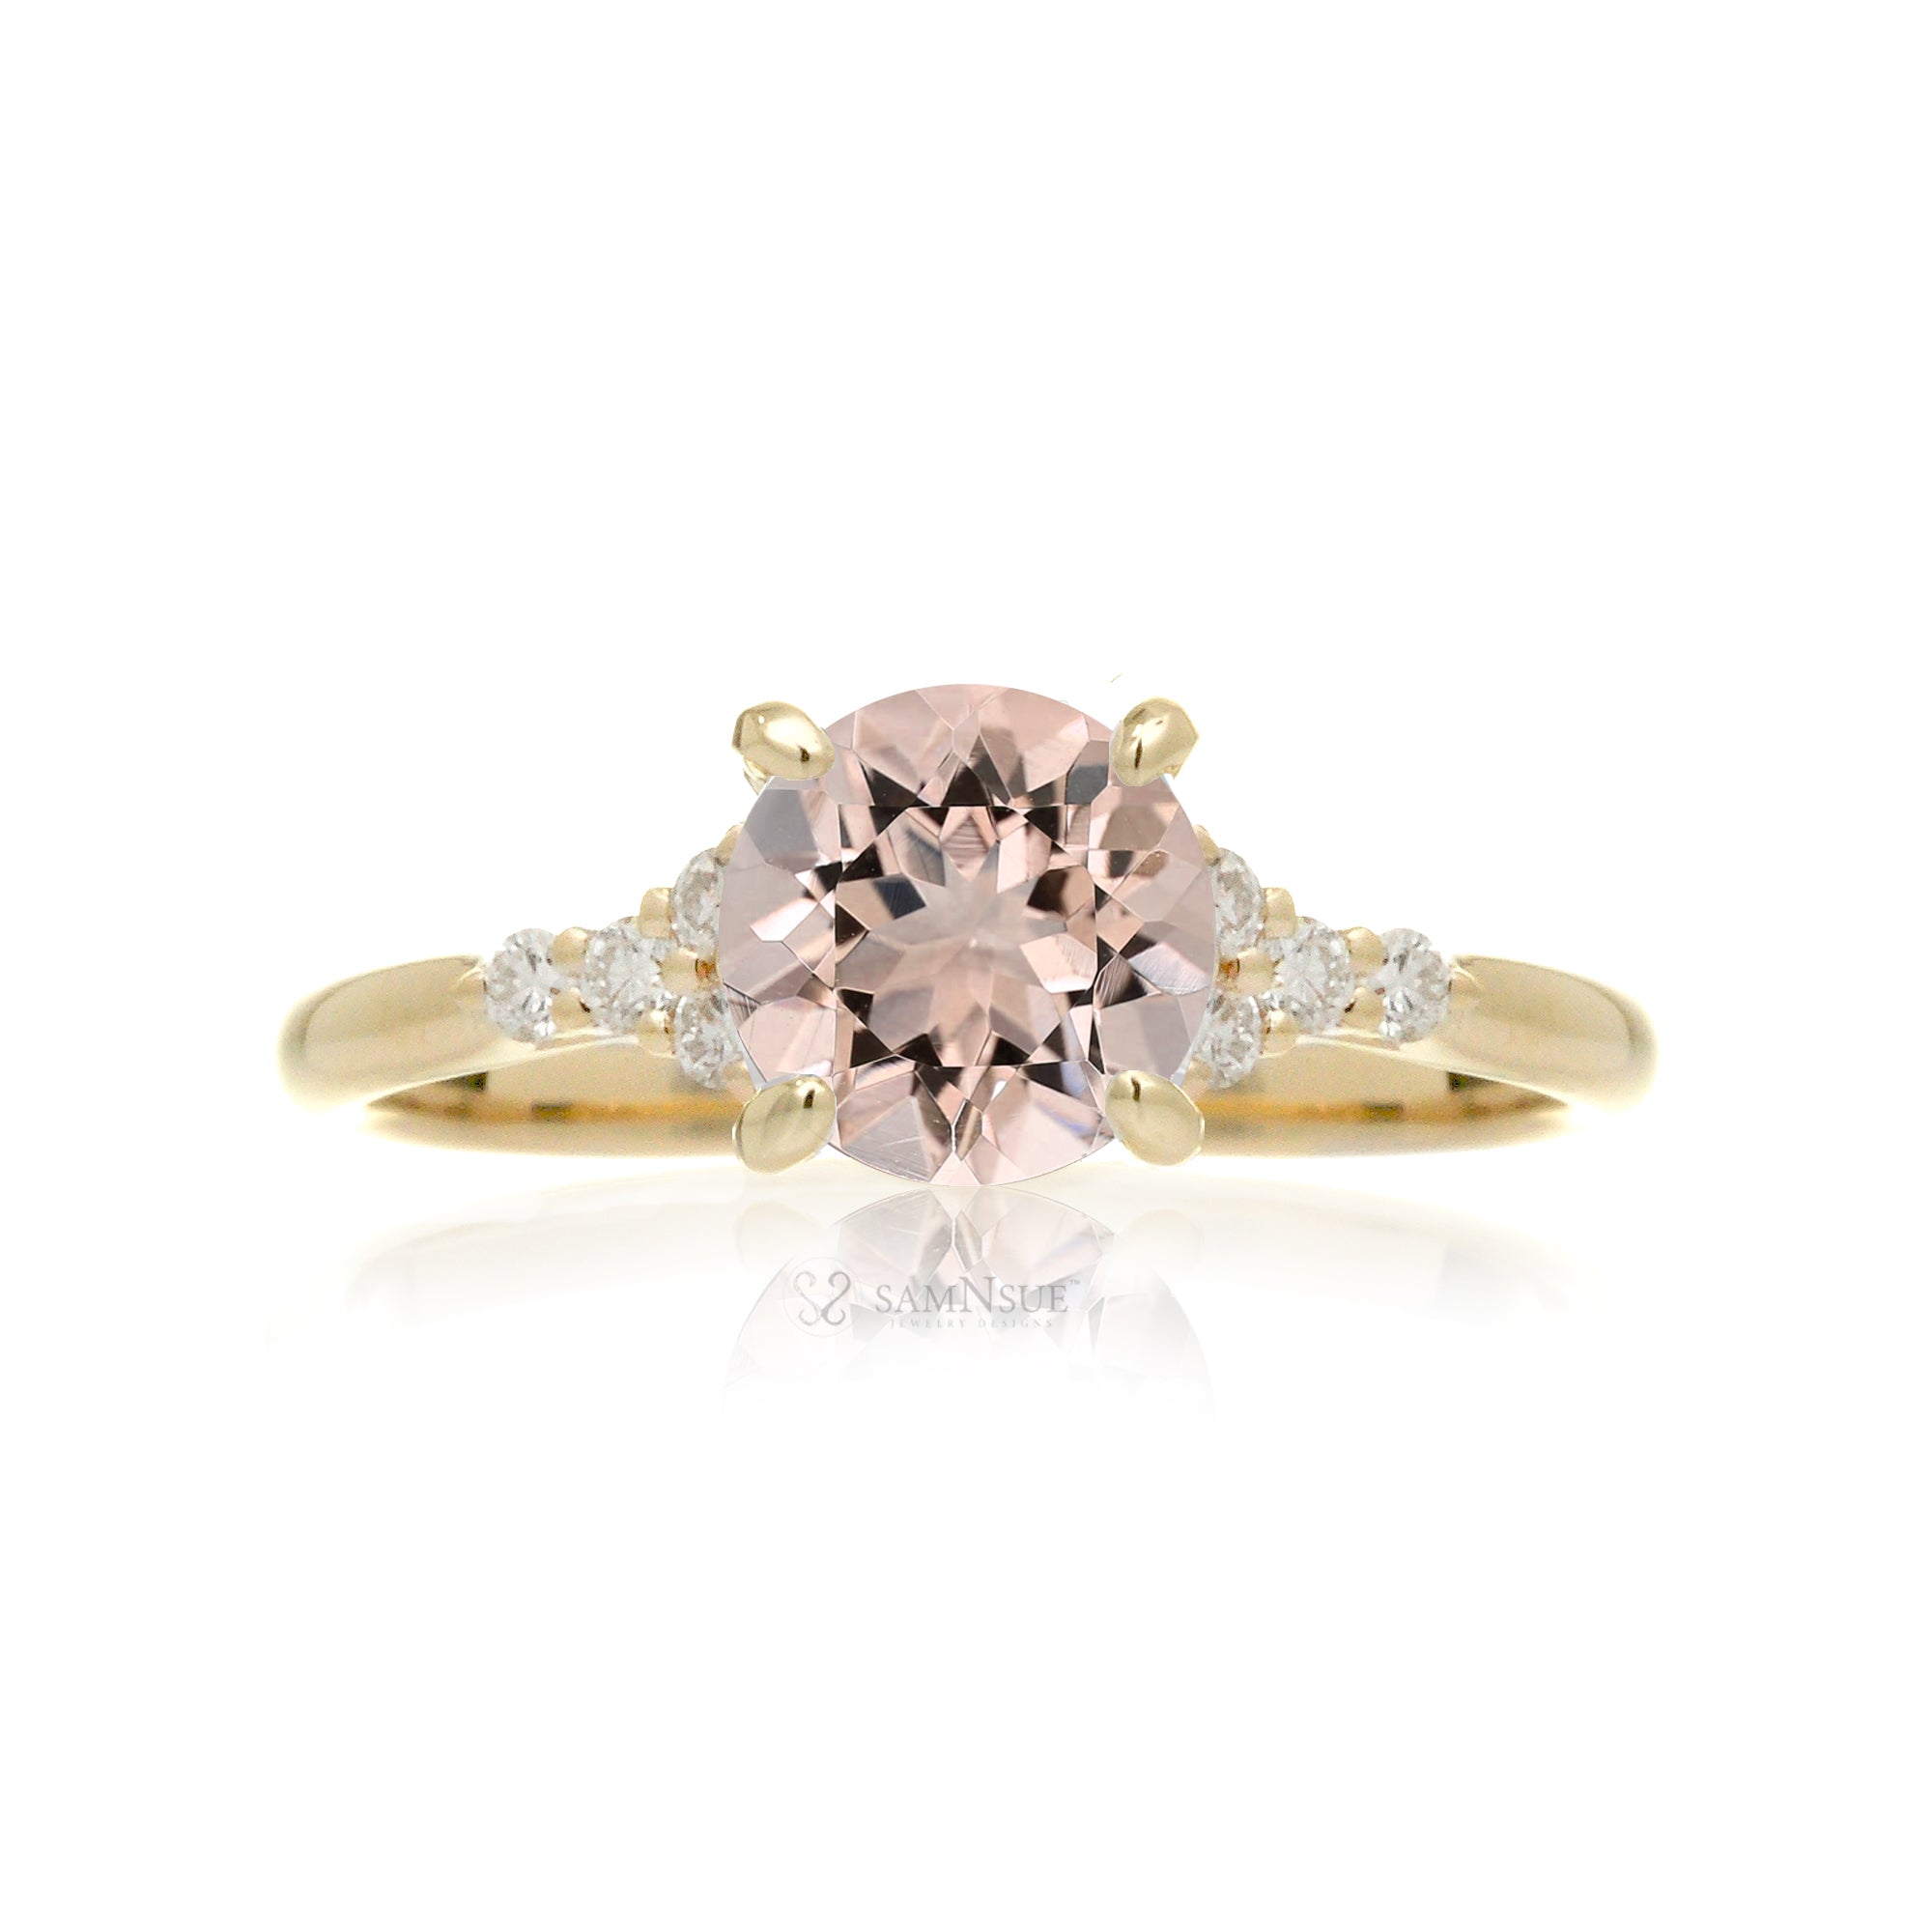 Round morganite ring with diamond accent in yellow gold